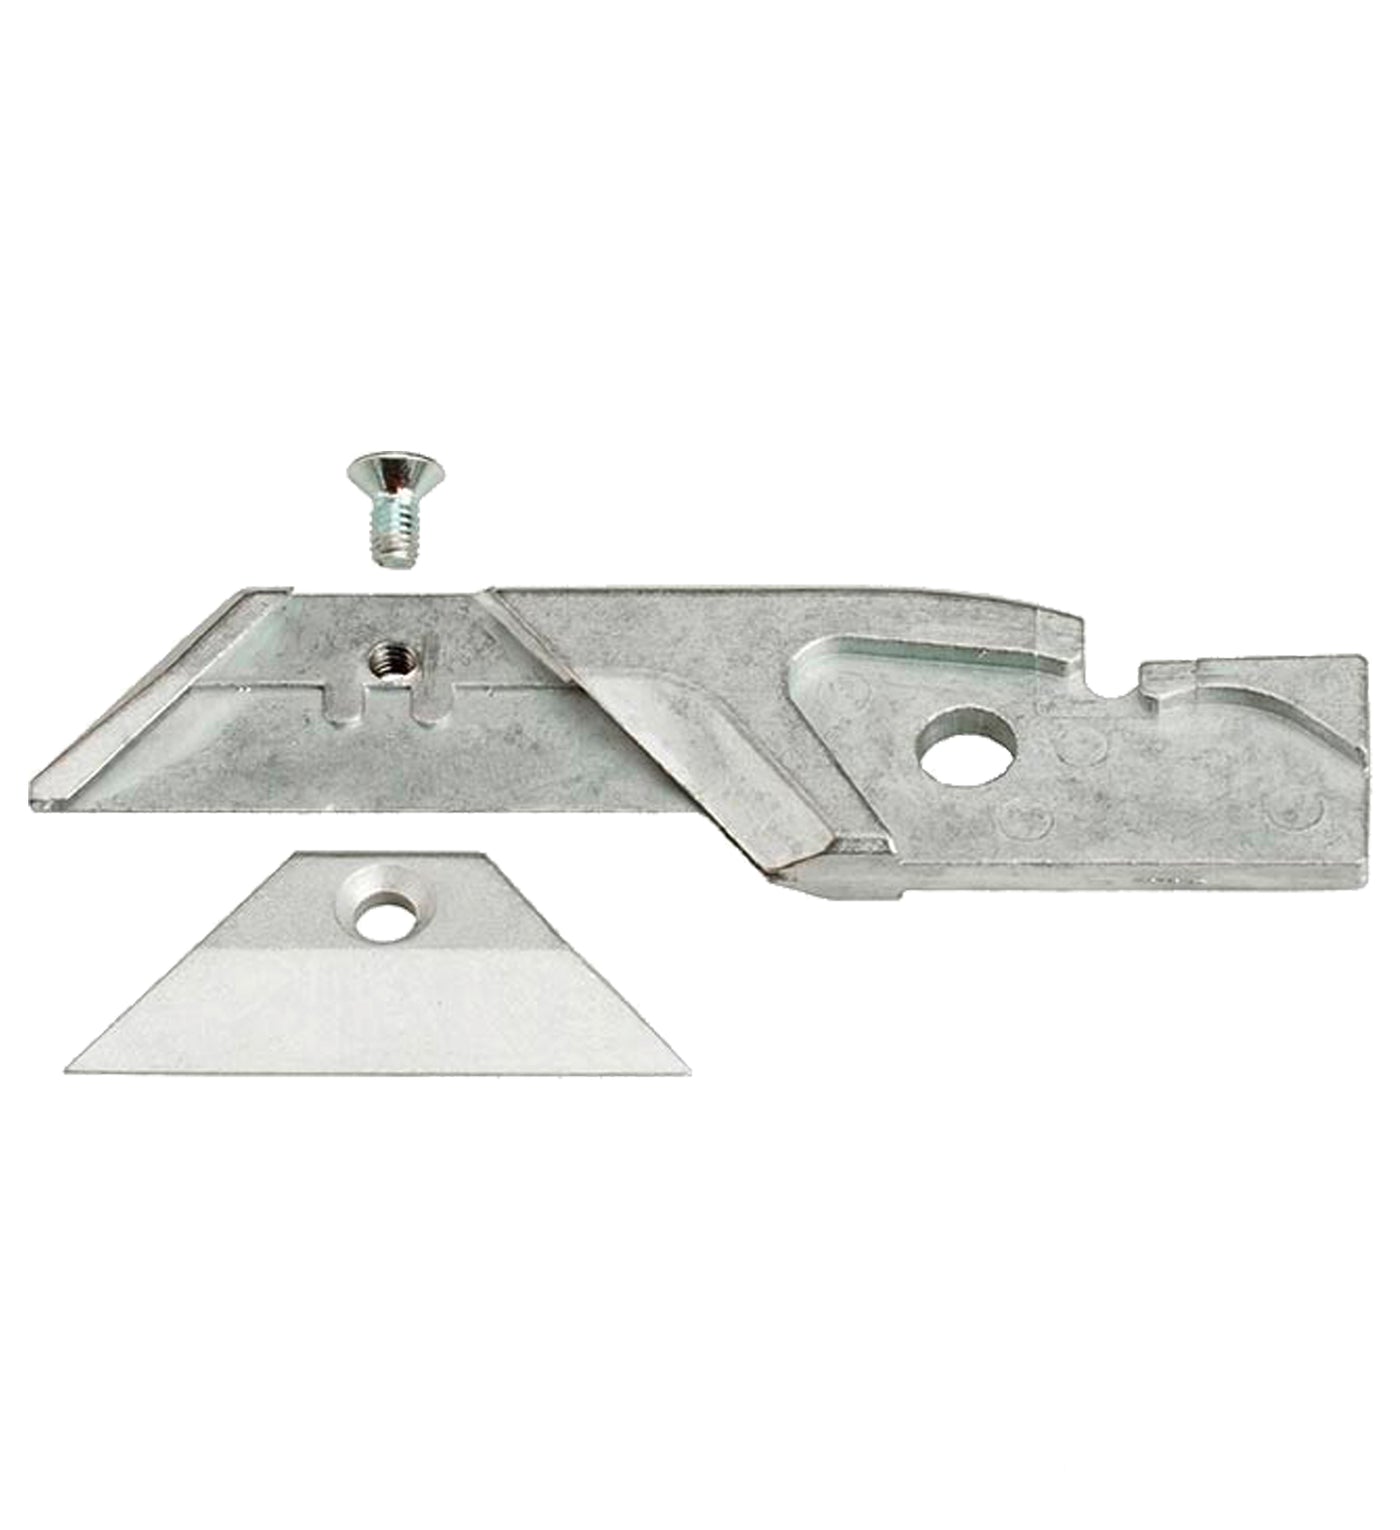 Replacement mounting support for LO 3805, 3804, 3806 Industrial Cutters